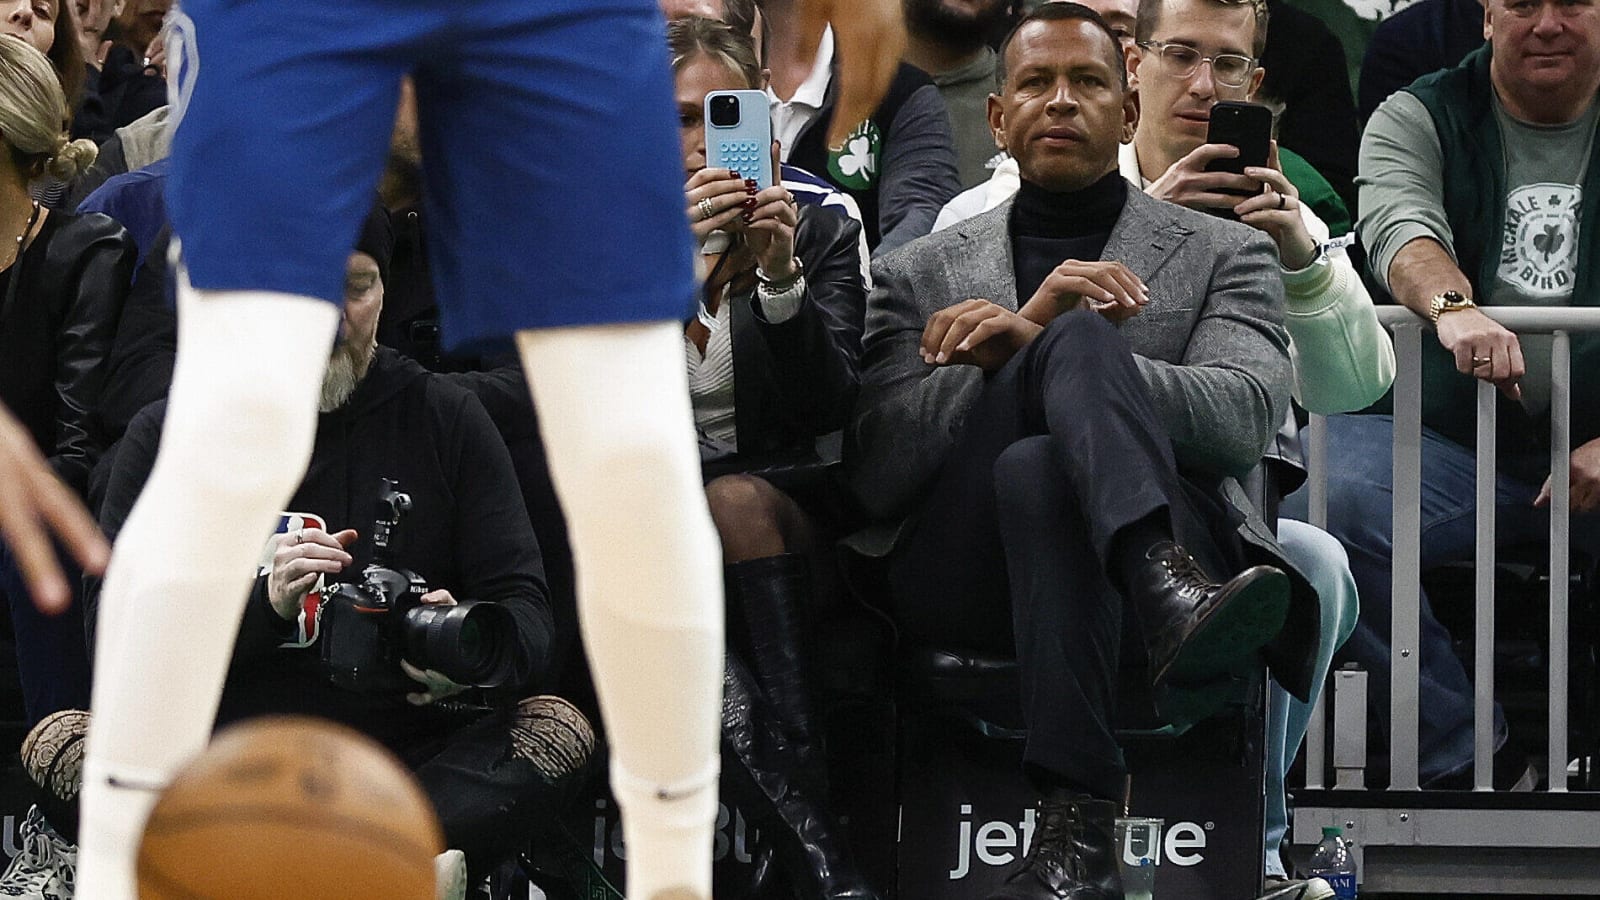 A-Rod Left Cashless at Timberwolves Checkout, Before Meeting Ruthless Businessman Glen Taylor